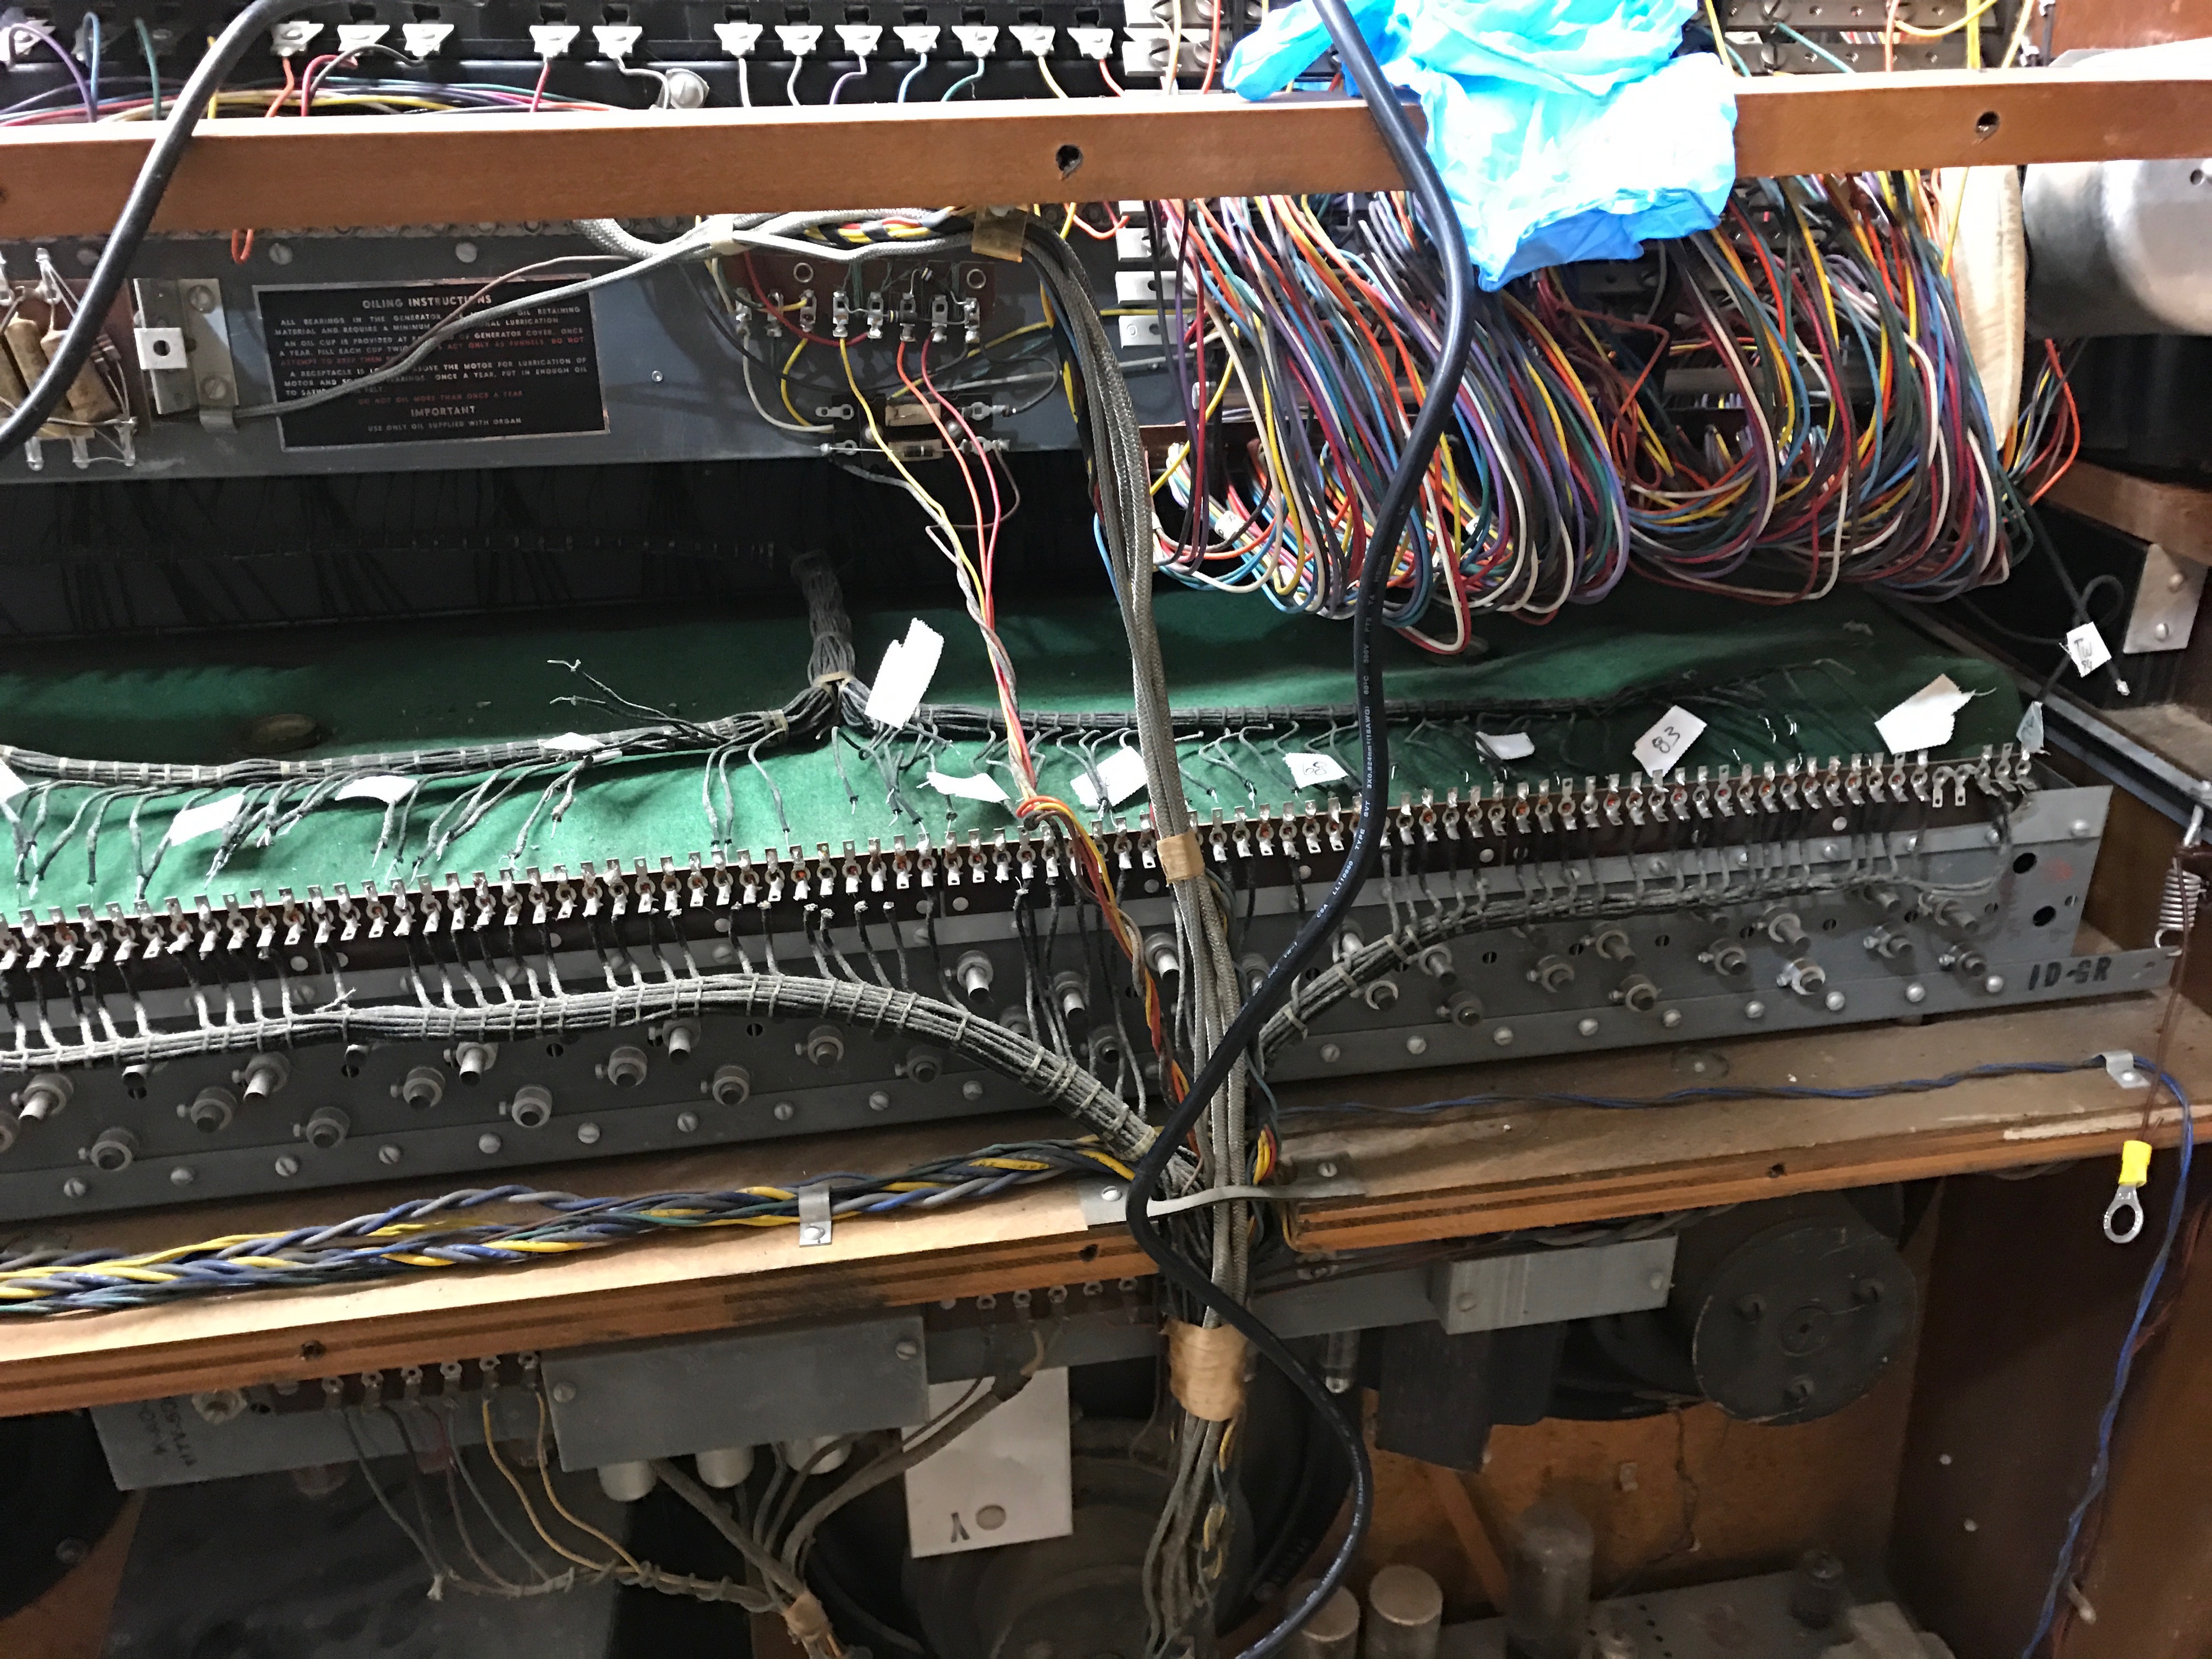 Unsoldering wiring harness